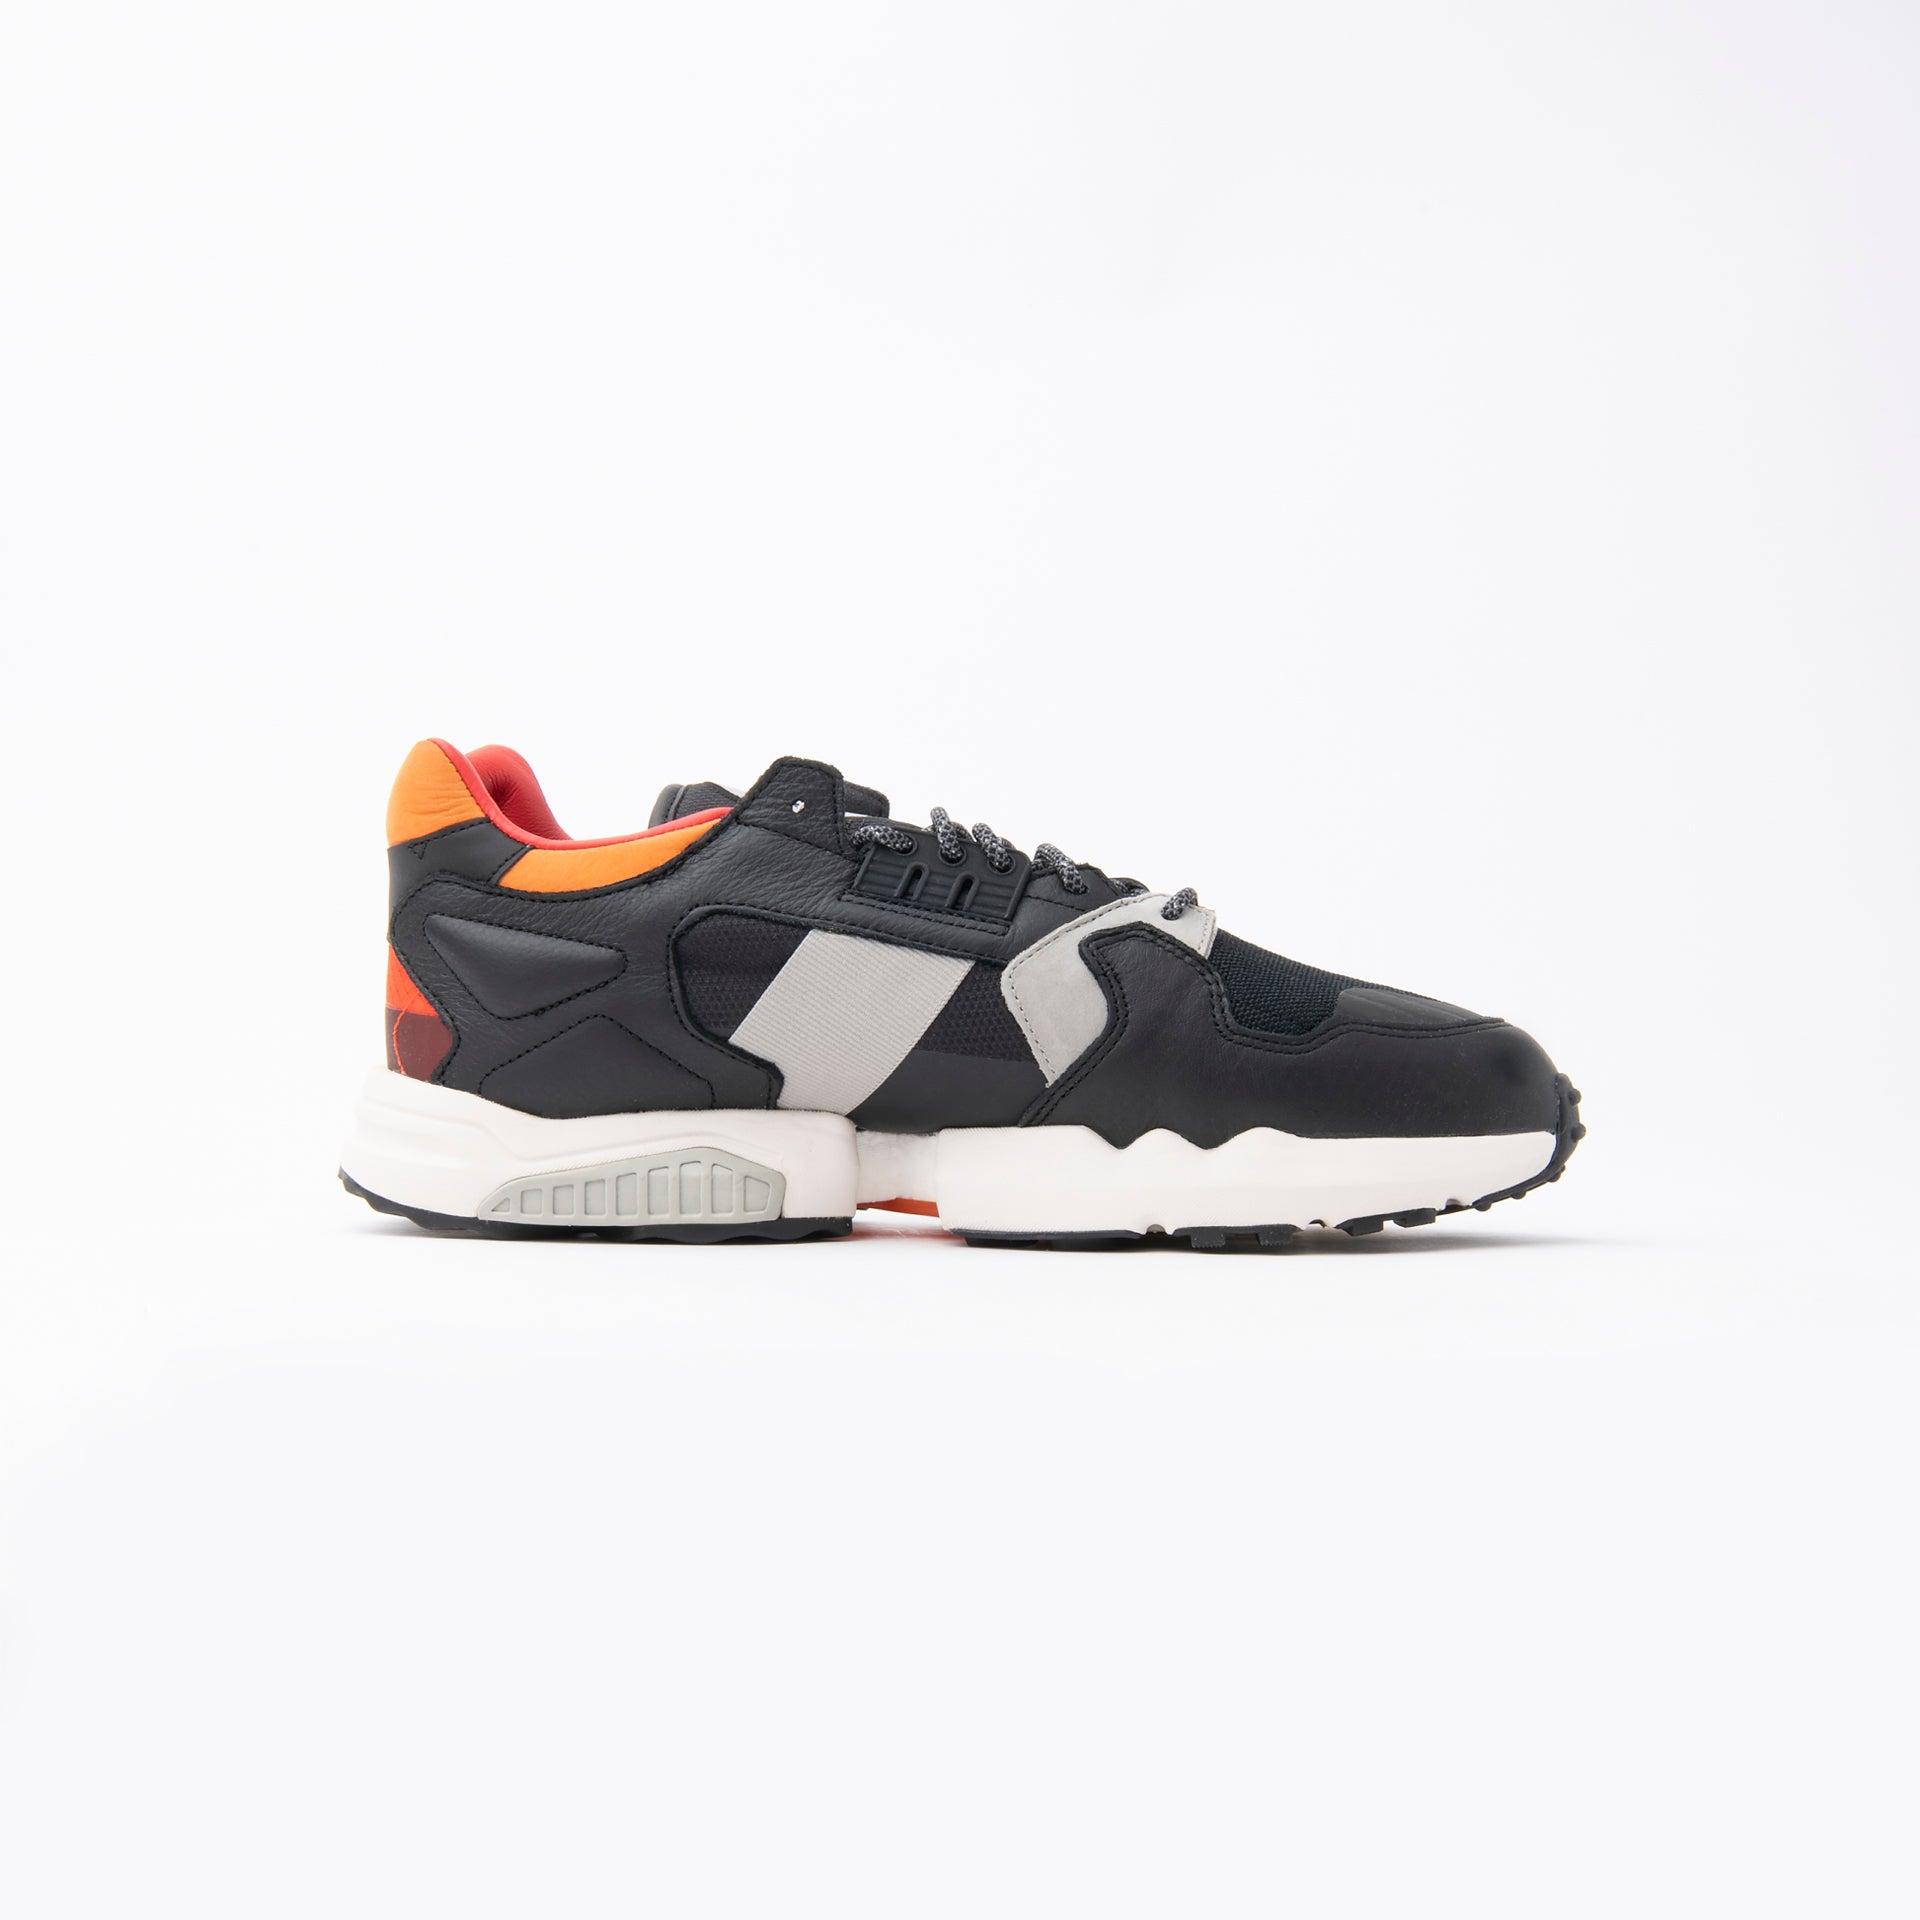 Black And Orange ZX Torsion Sneakers From Adidas